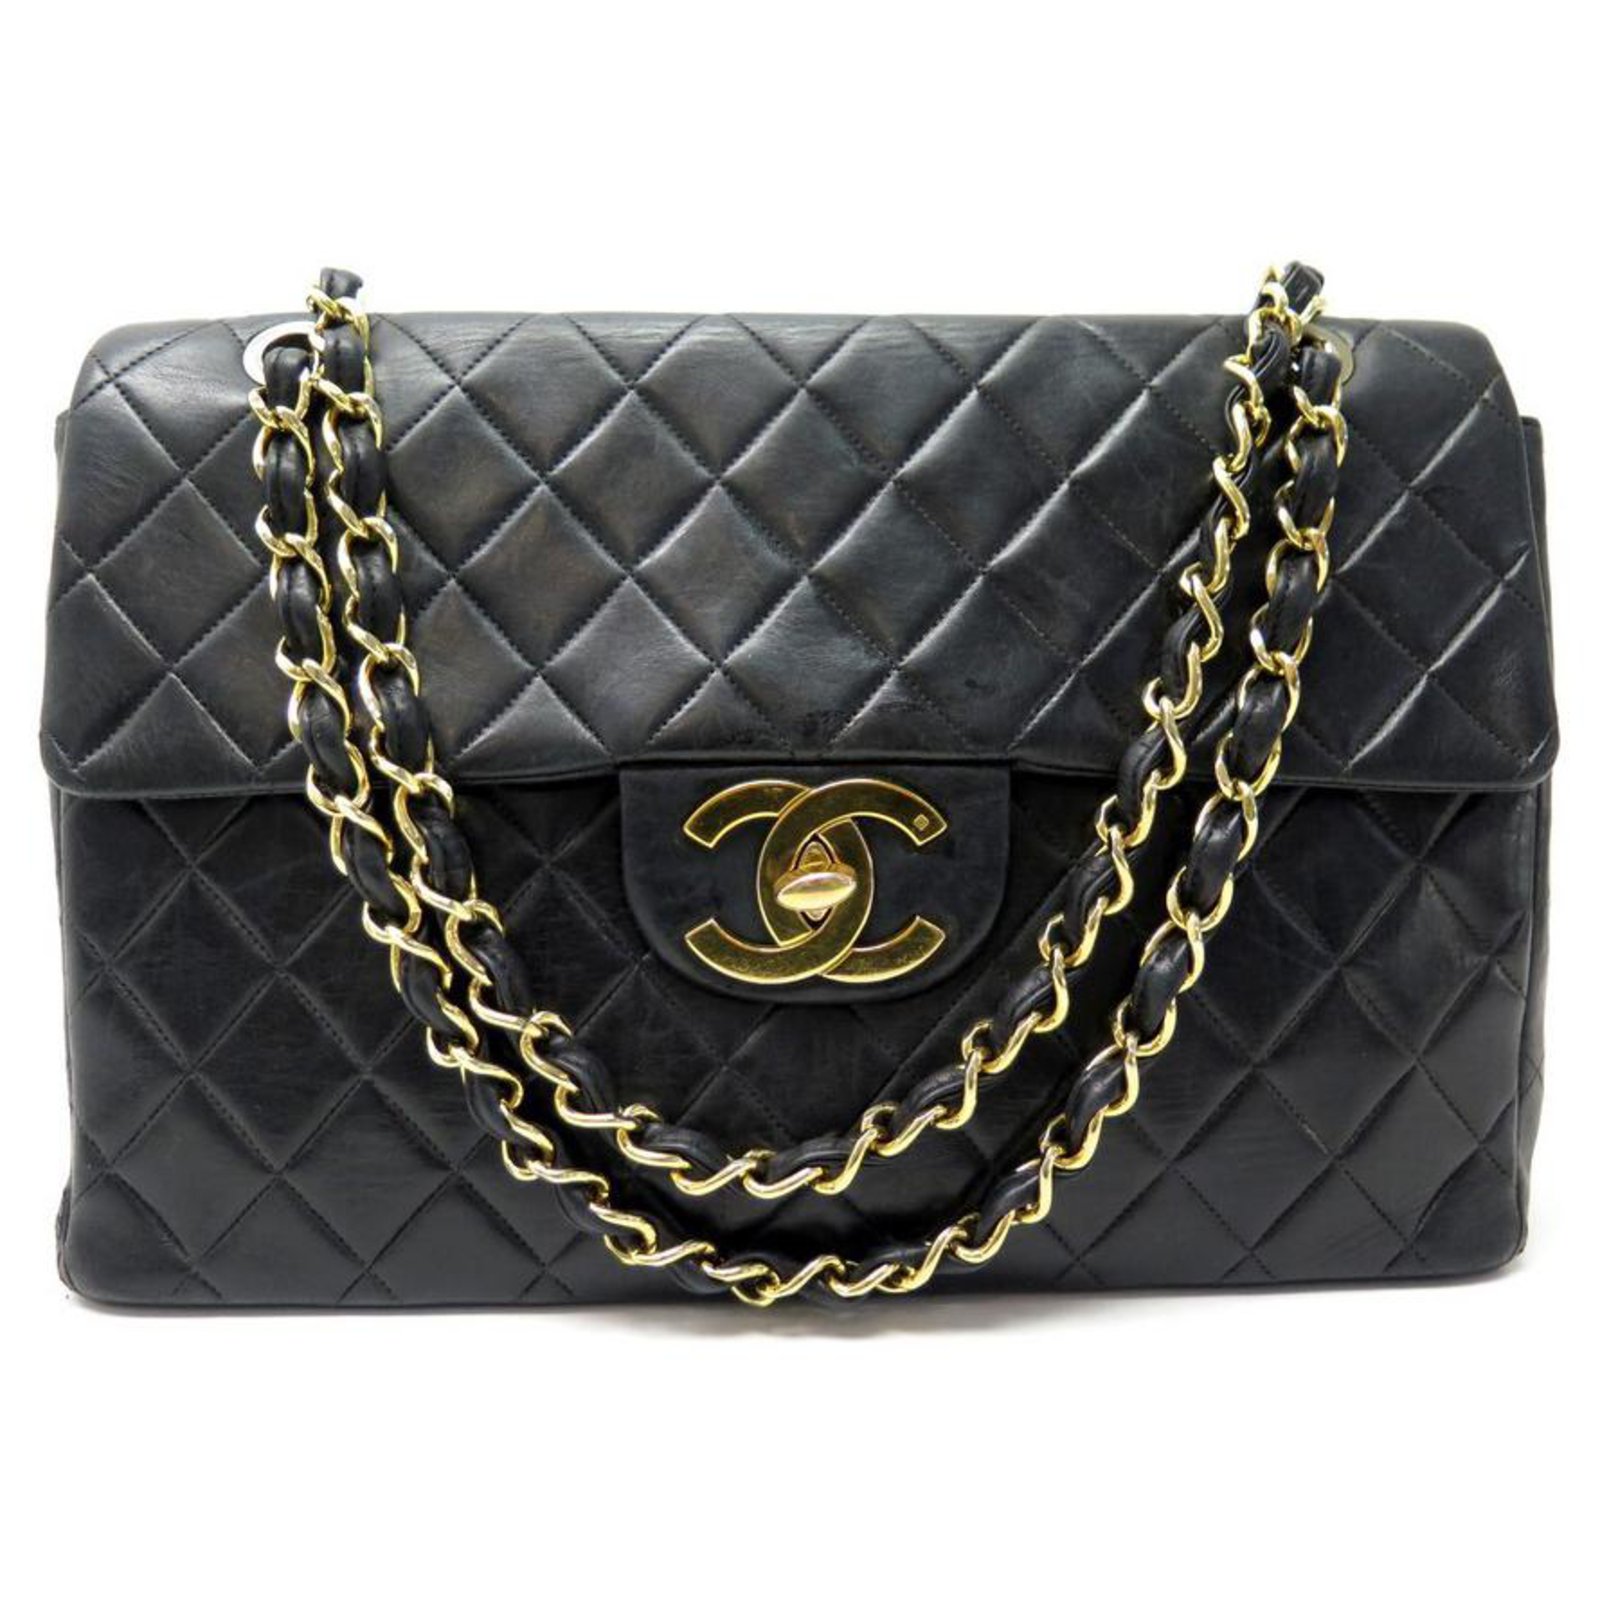 VINTAGE CHANEL TIMELESS MAXI JUMBO HANDBAG IN QUILTED LEATHER HAND BAG ...